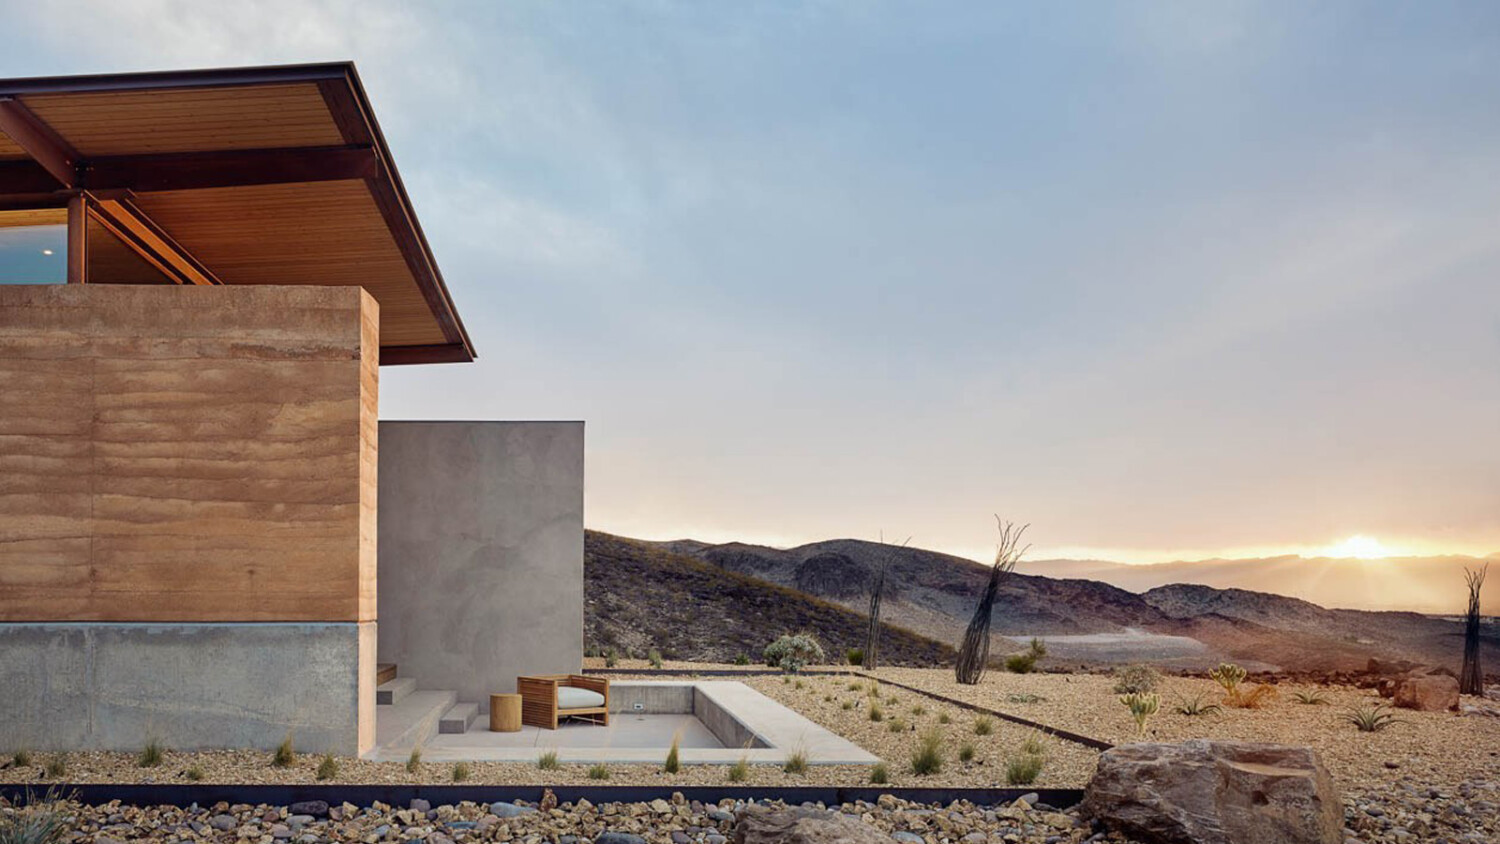 Casey Dunn Photographs Nevada’s New Architectural Mecca